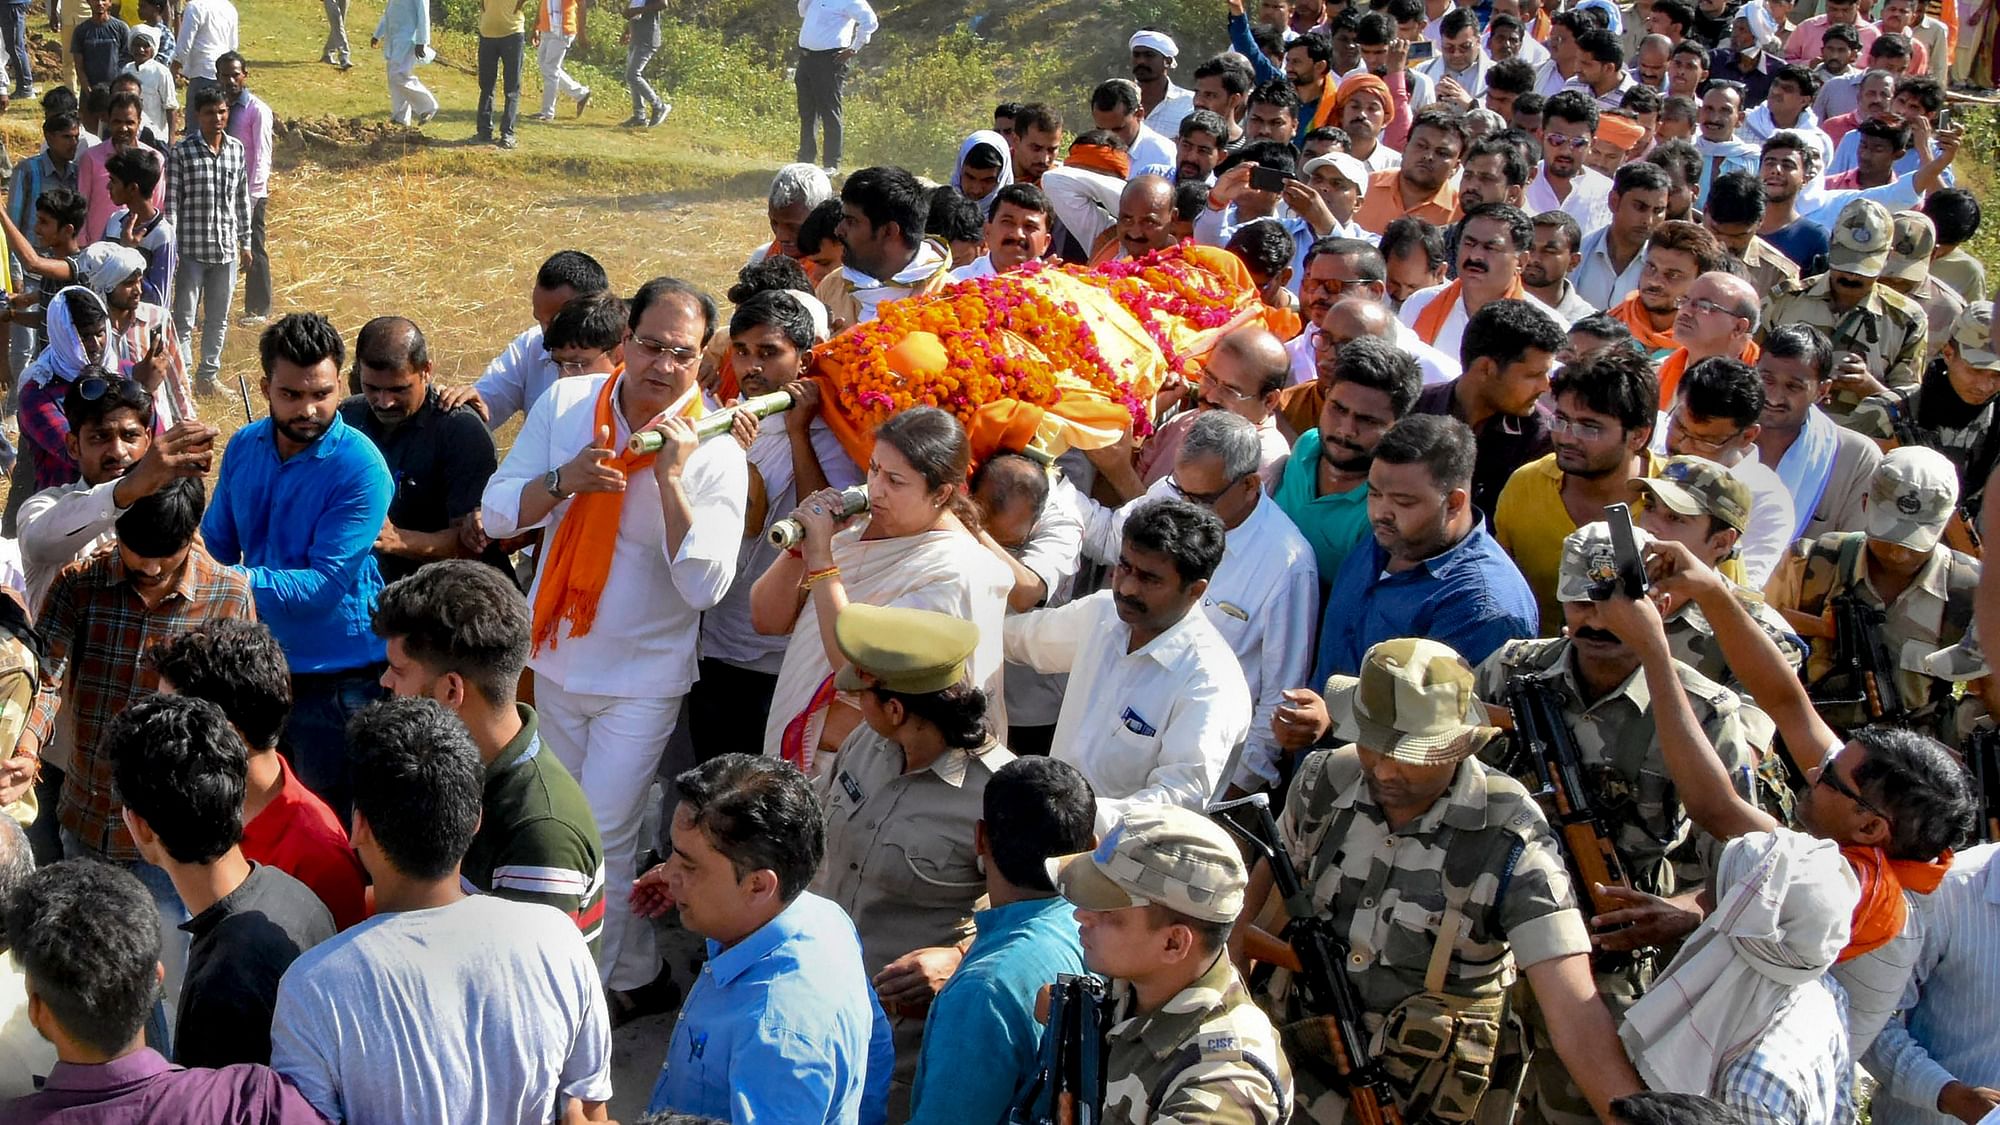 BJP MP Smriti Irani shoulders to the mortal remains of former village head (pradhan) Surendra Singh, during his funeral.